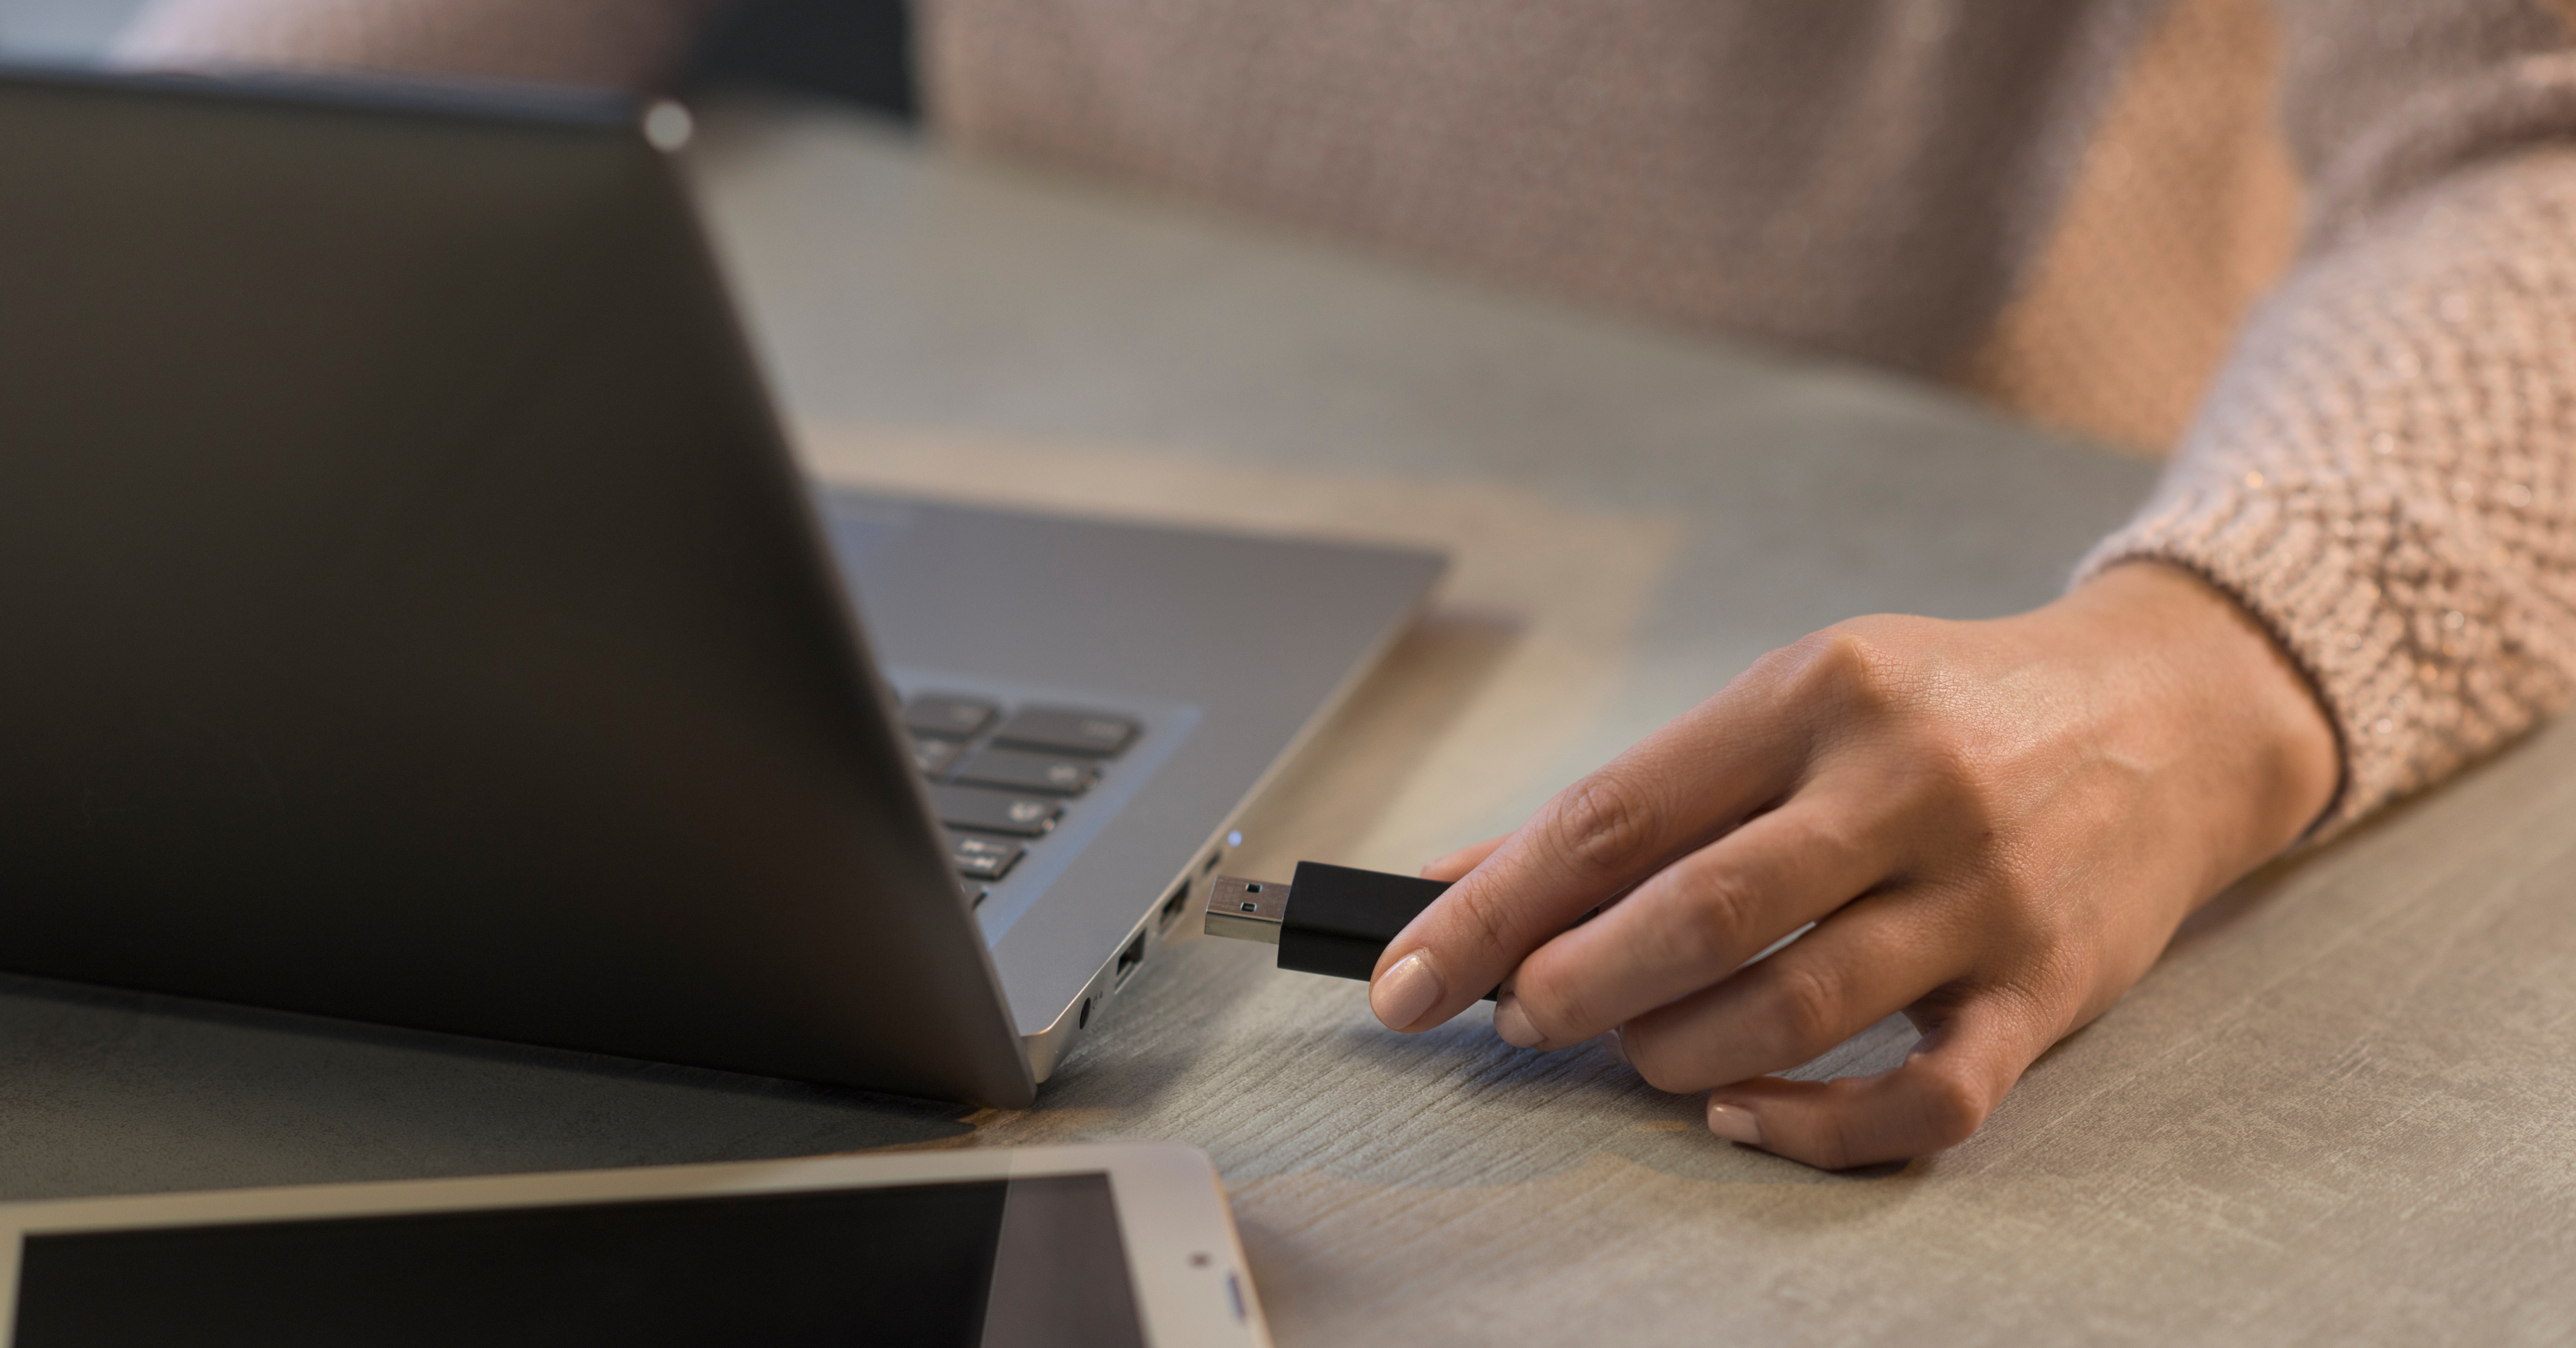 flash drive for laptops - host giveaway - usa today - new yorker - games